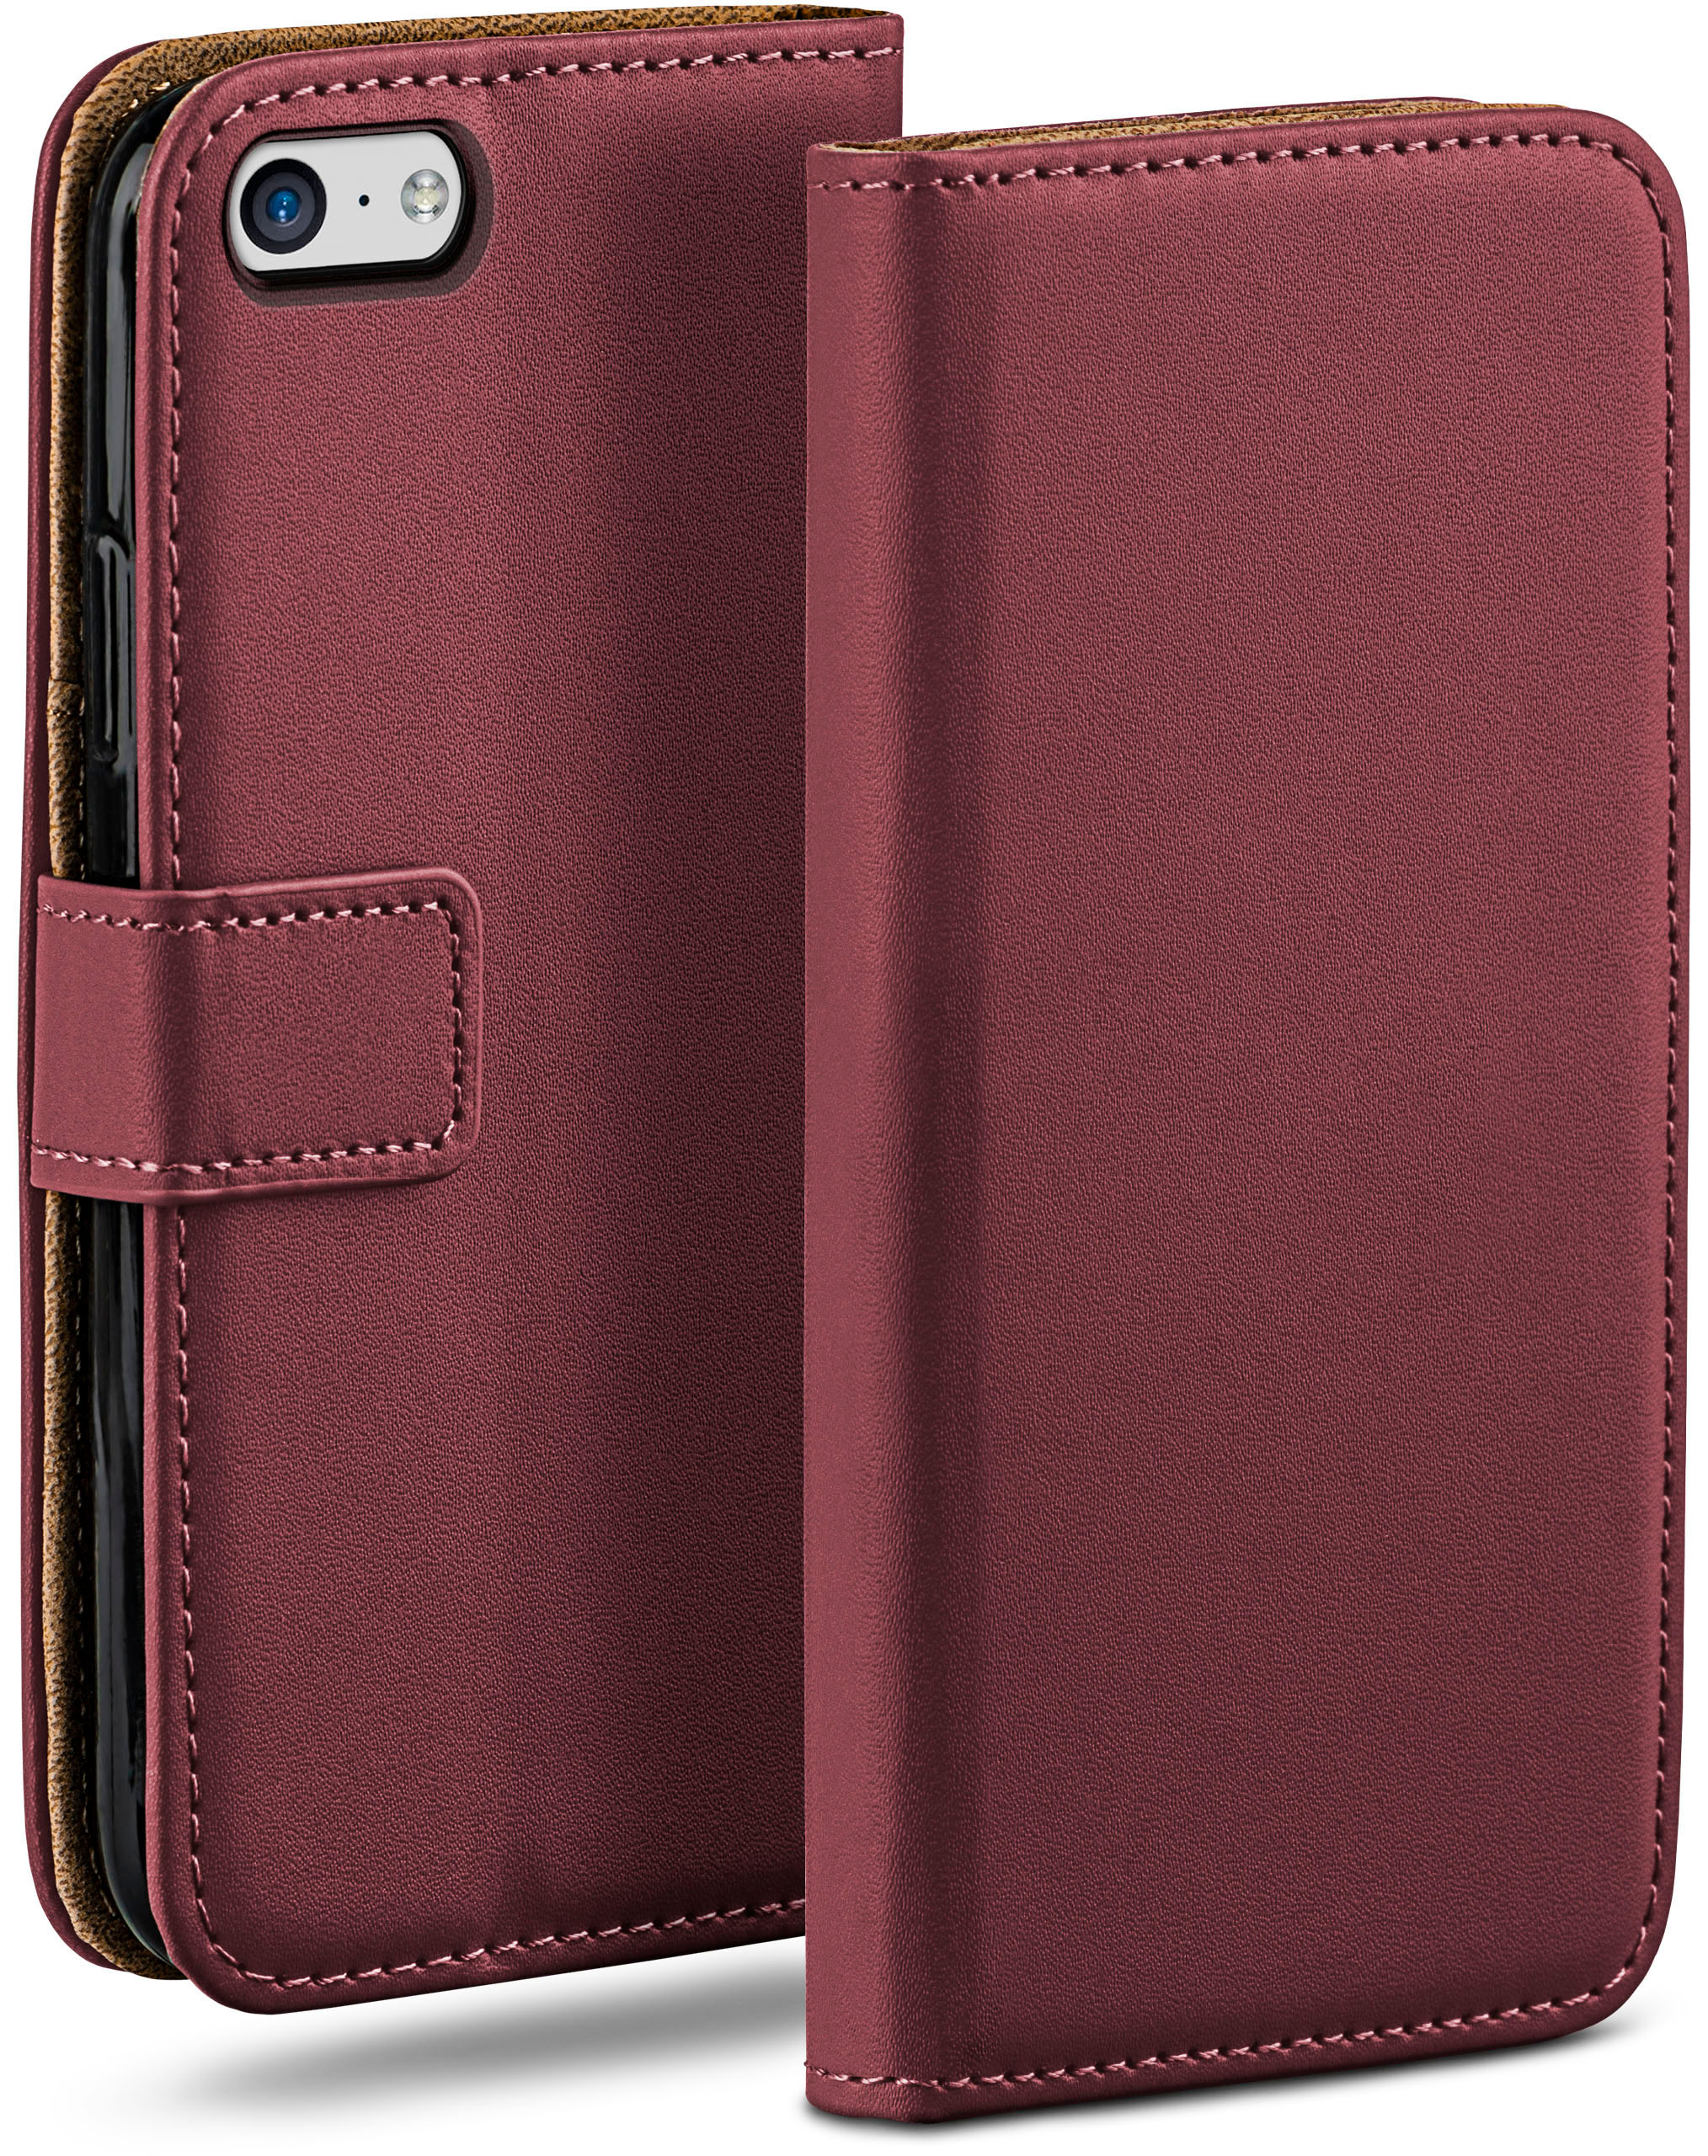 MOEX Book Apple, Maroon-Red Bookcover, iPhone 5c, Case